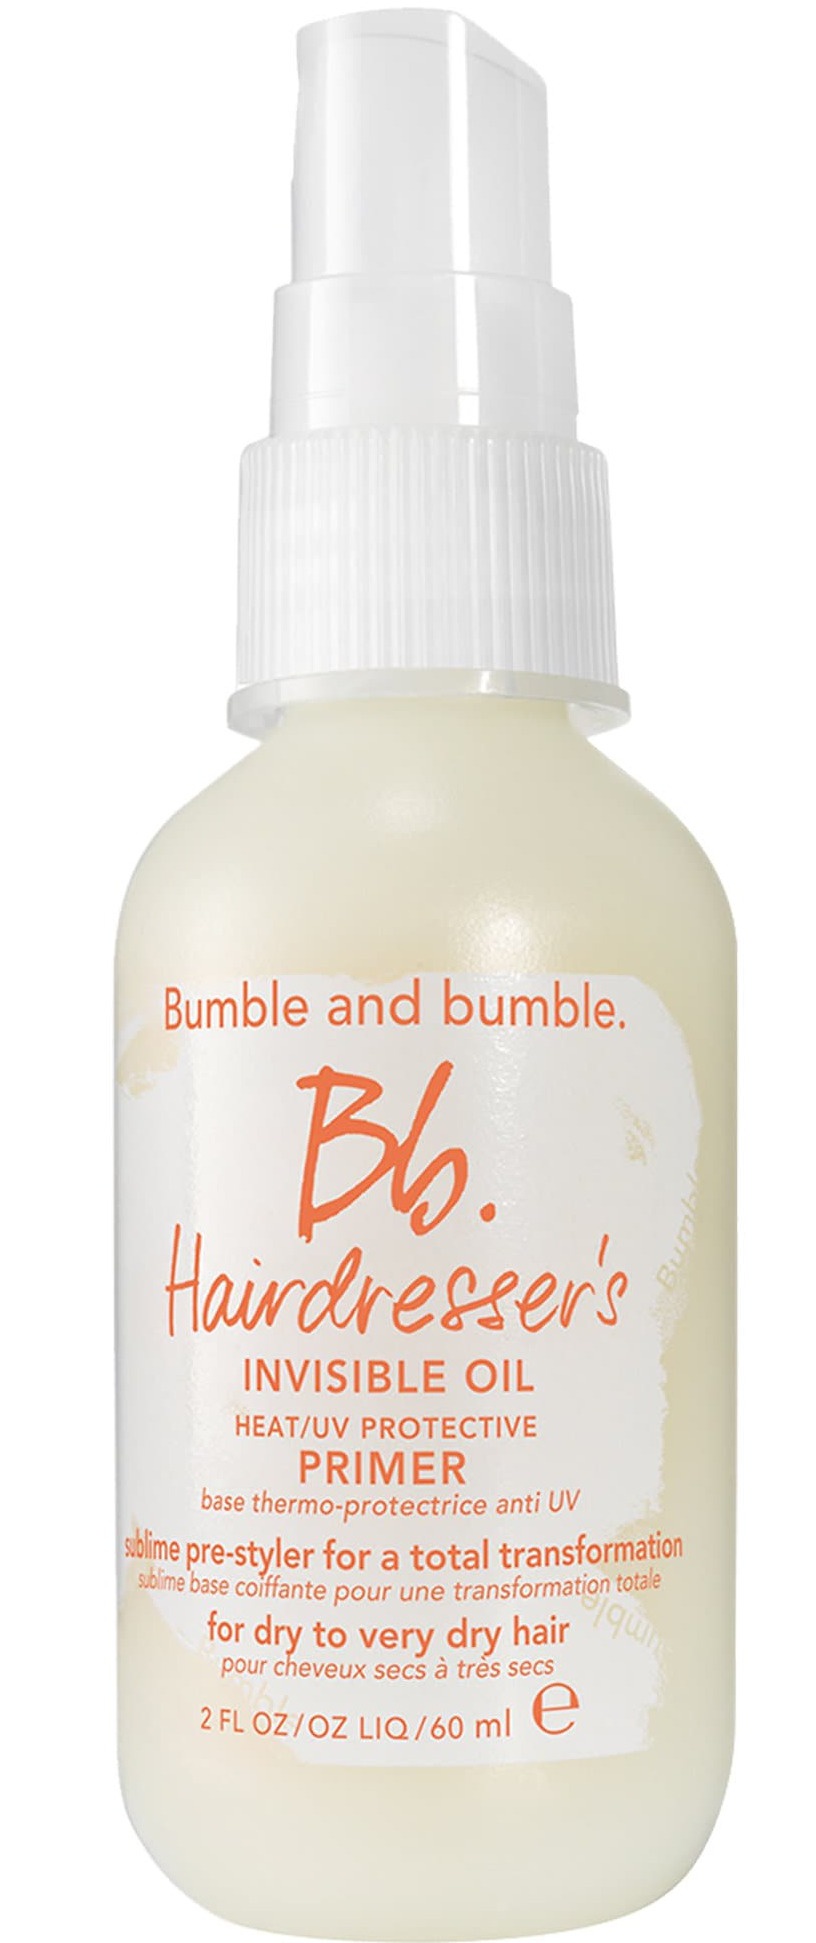 Bumble And Bumble Hairdresser’s Invisible Oil Heat Protectant Leave In Conditioner Primer